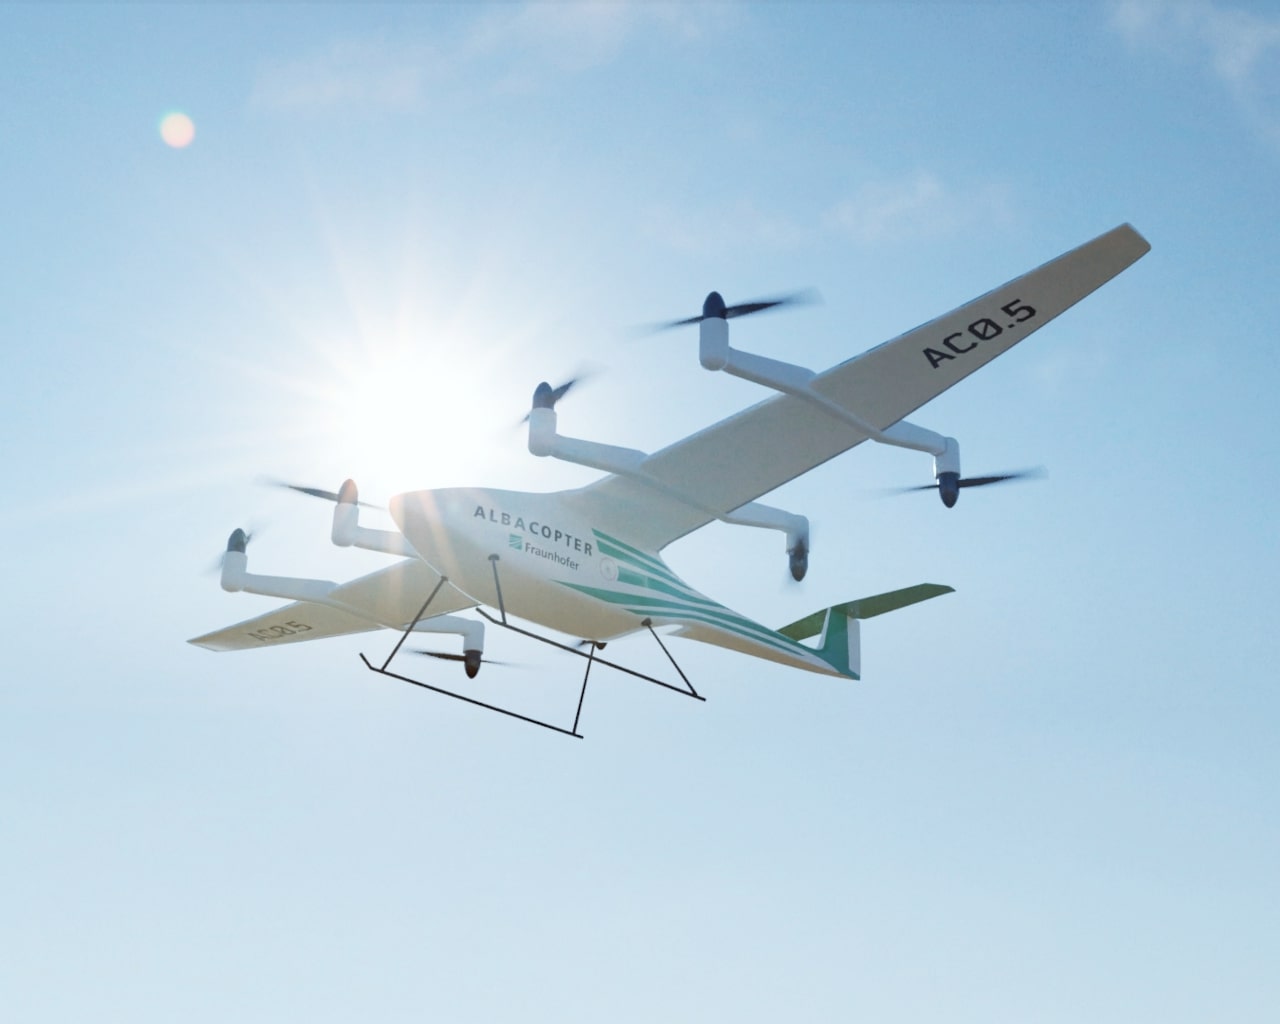 Within the "ALBACOPTER®" Lighthouse Project led by Fraunhofer IVI, an airborne experimental platform will be developed and approved for testing and demonstration flights that combines the VTOL capabilities of multicopters with the aerodynamic advantages of gliders.